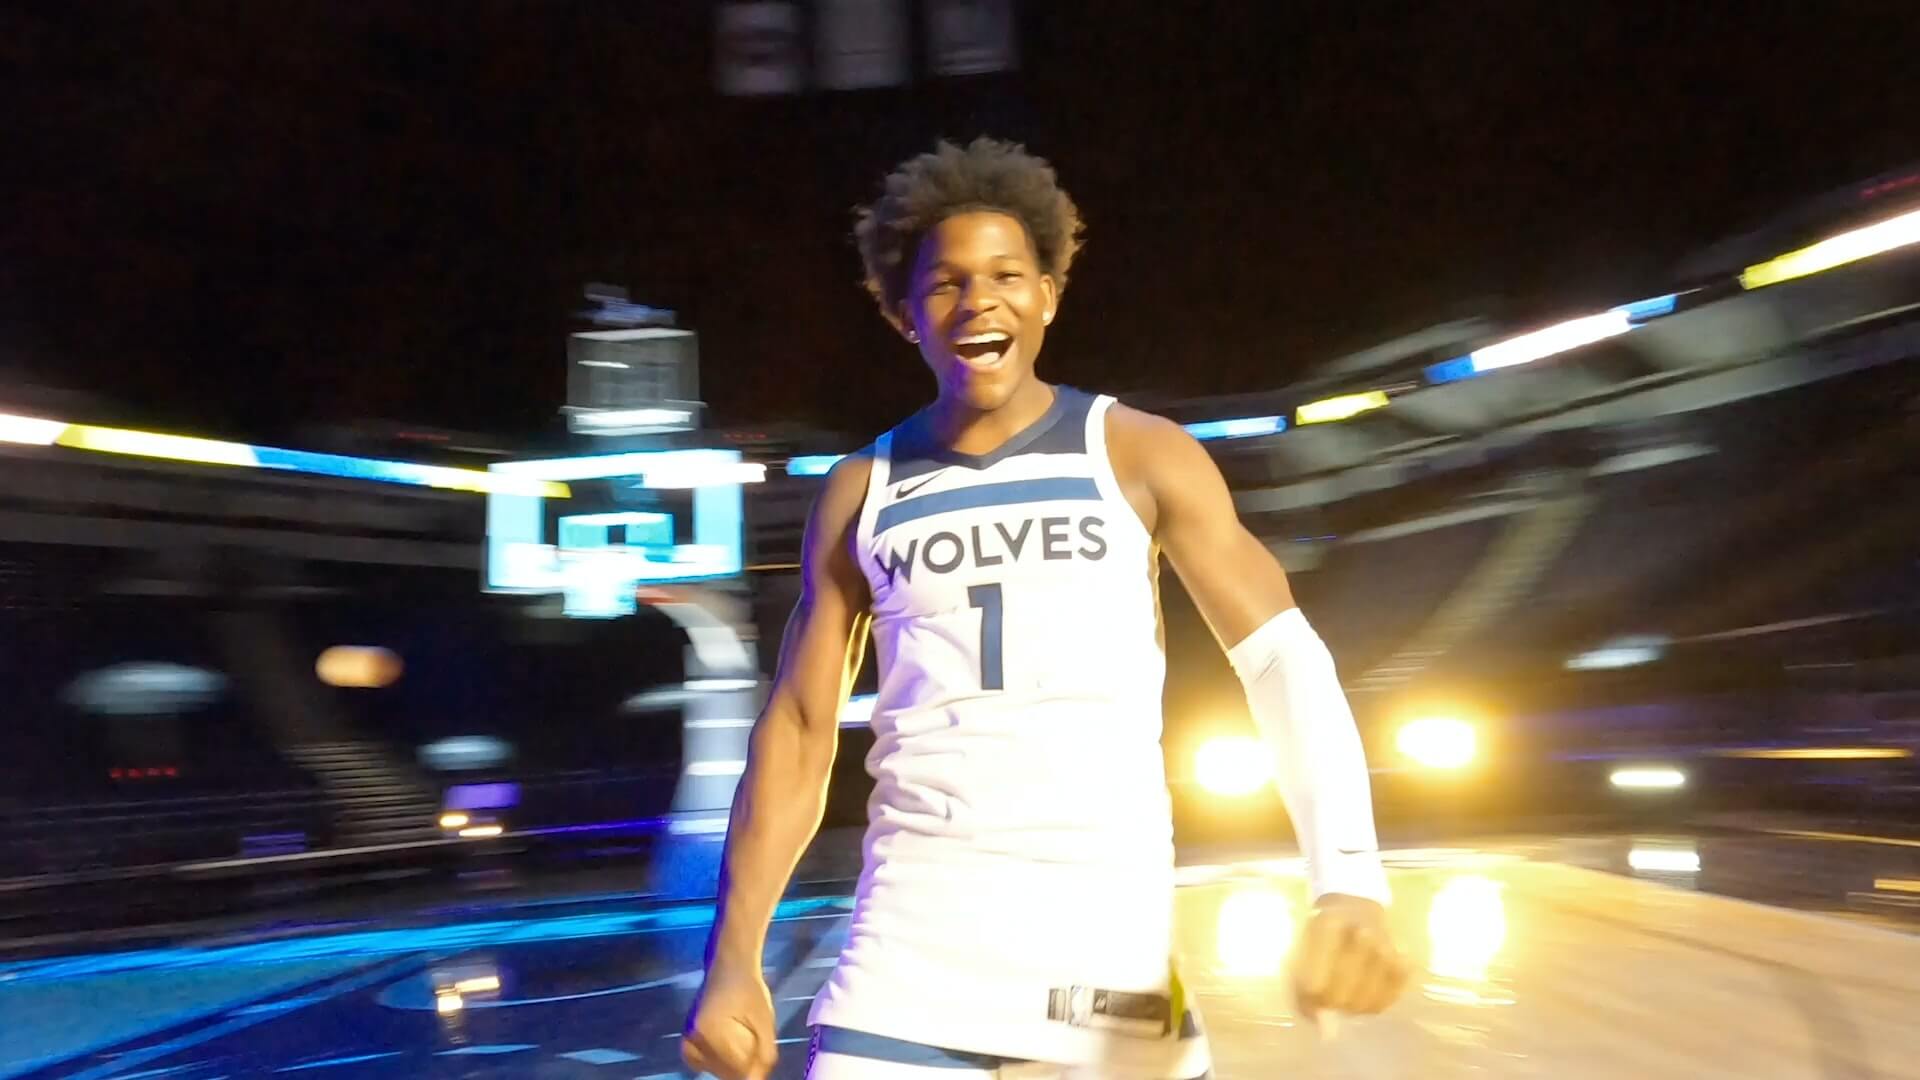 Timberwolves Season-Opening First Person Drone Hype Video